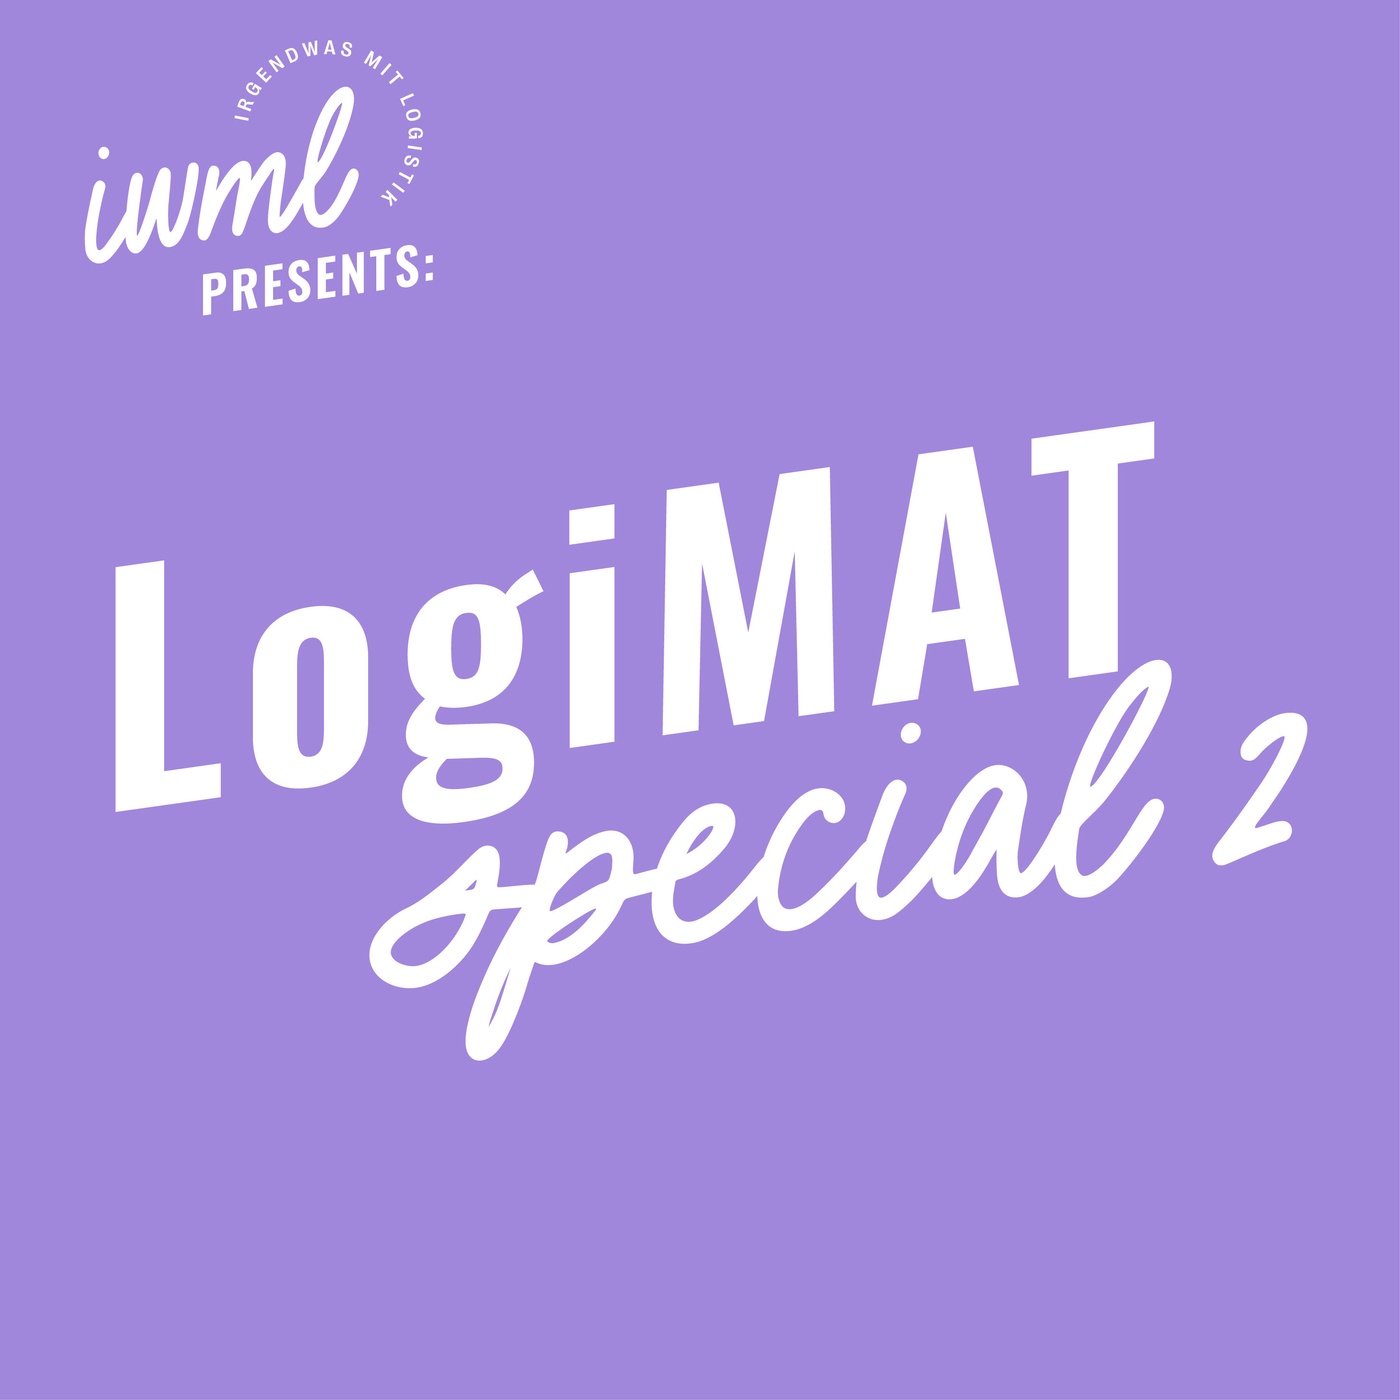 OOTB #5 | Special: LogiMAT meets MODEX with Kevin Lawton from The New Warehouse Podcast